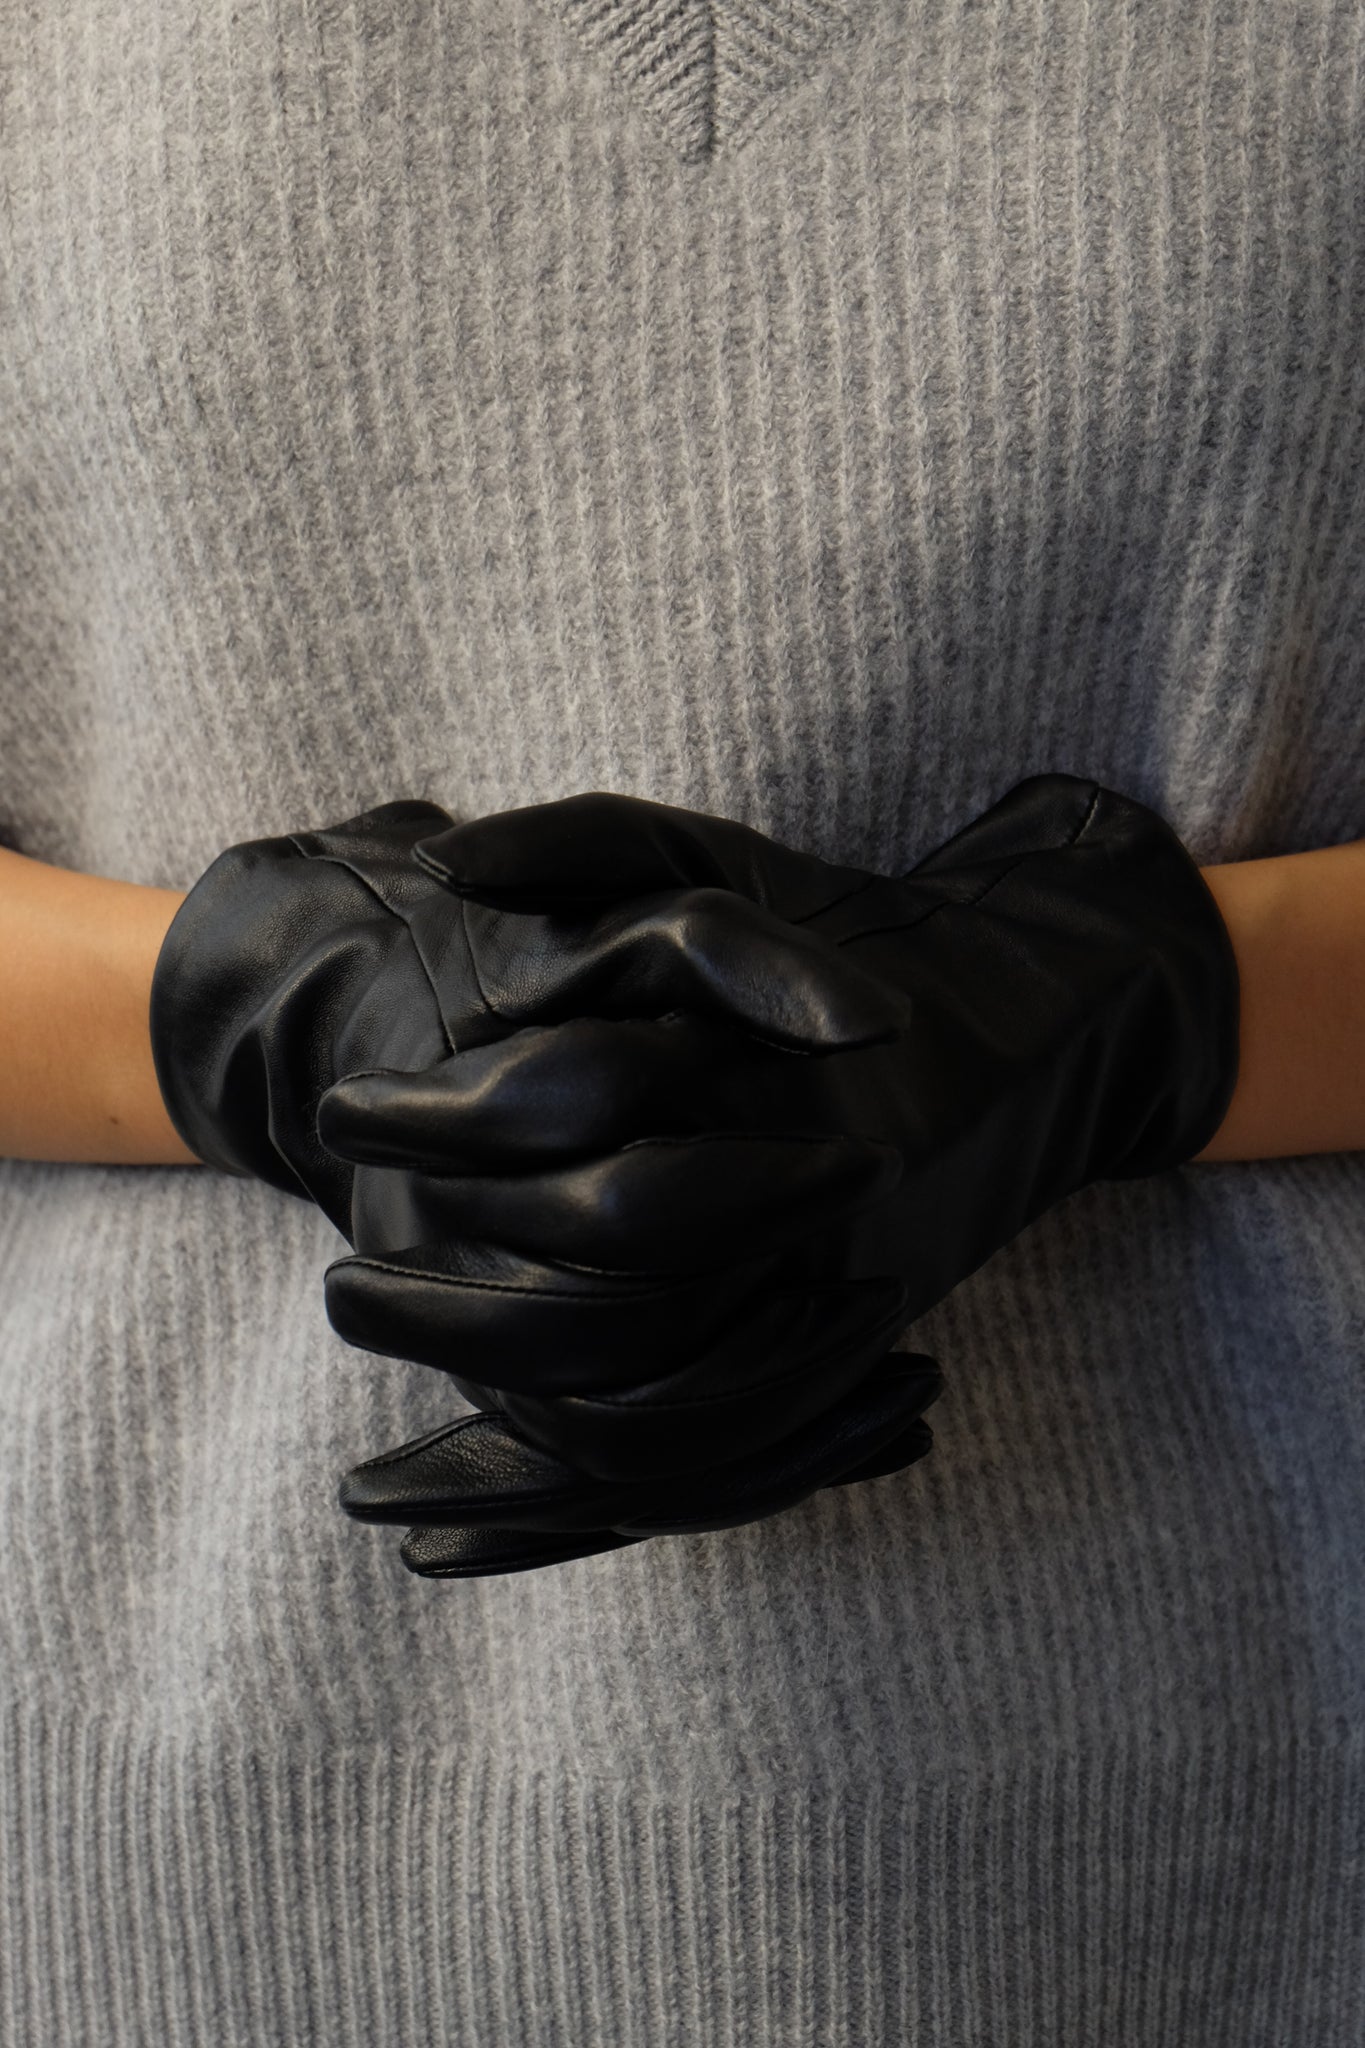 LINED LEATHER GLOVES IN OLIVE GREEN